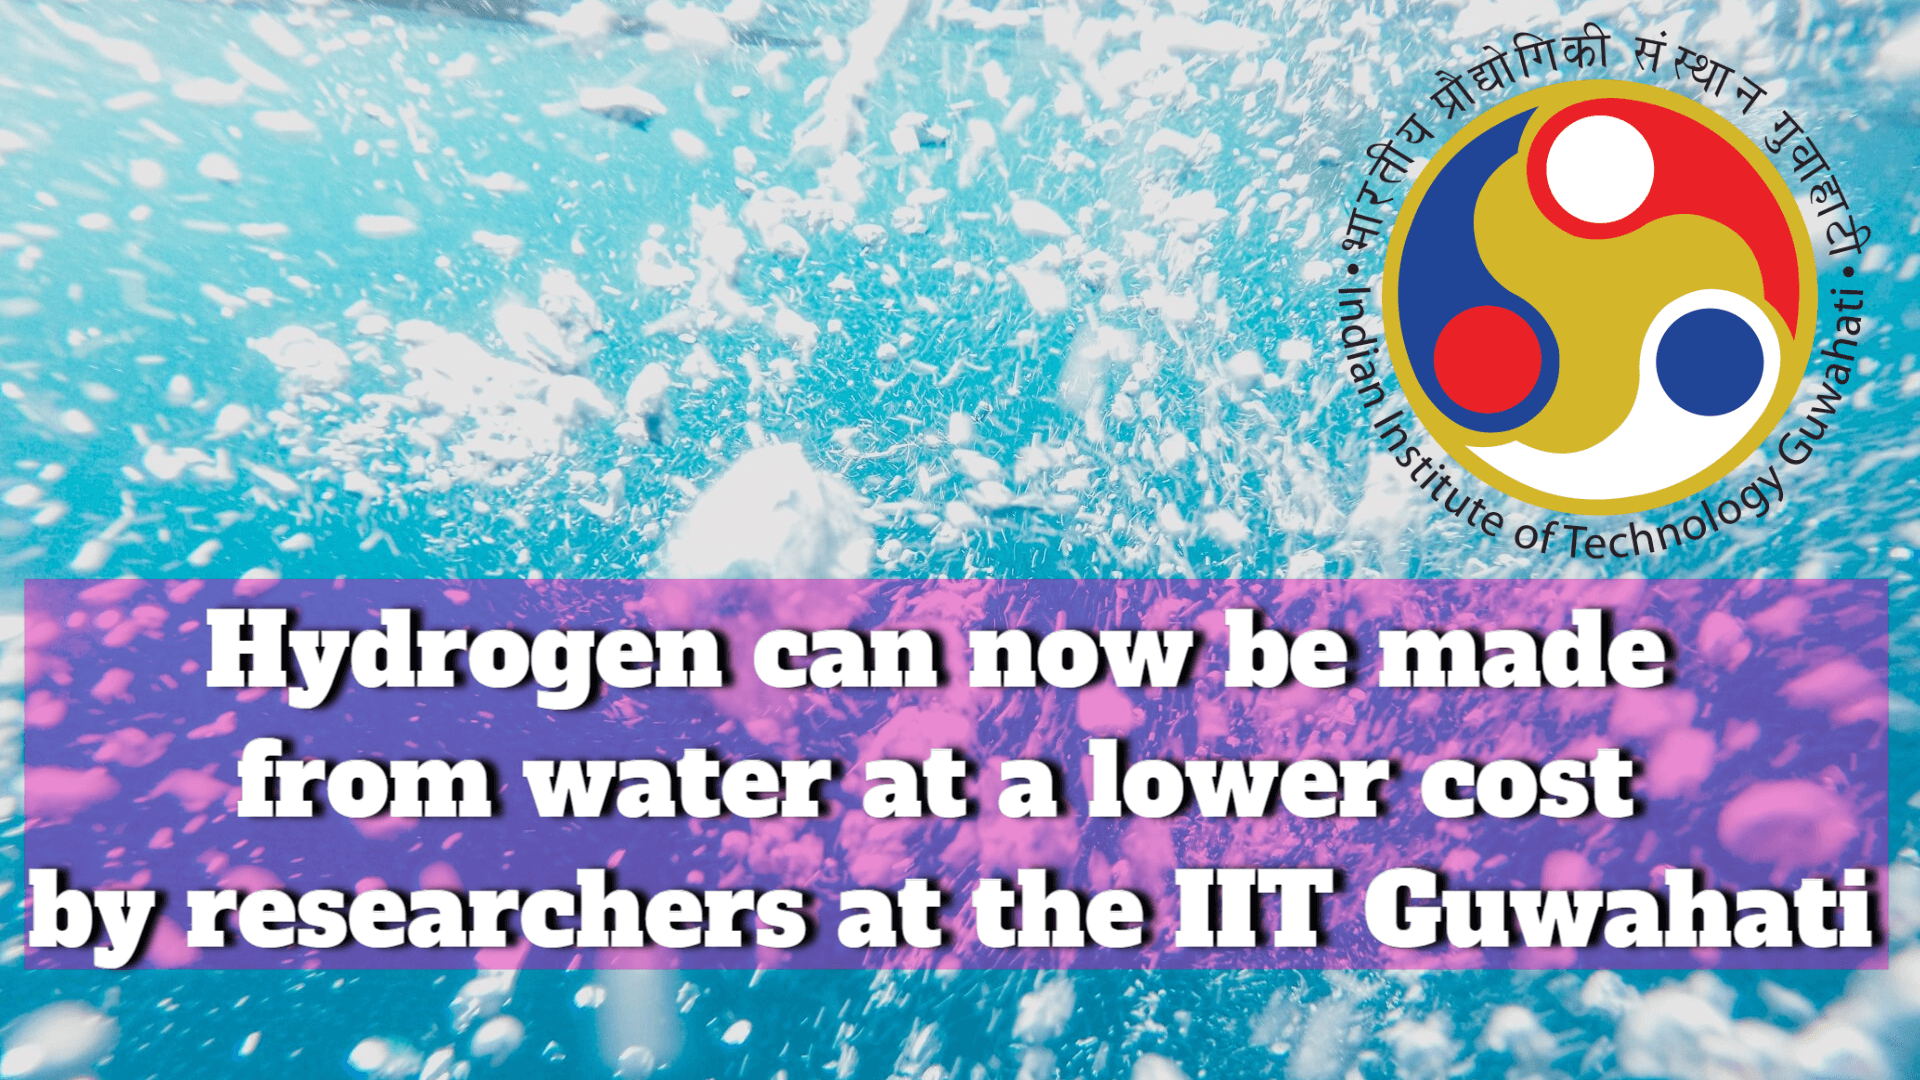 Researchers at IIT Guwahati have developed cheaper alternatives to make hydrogen from water